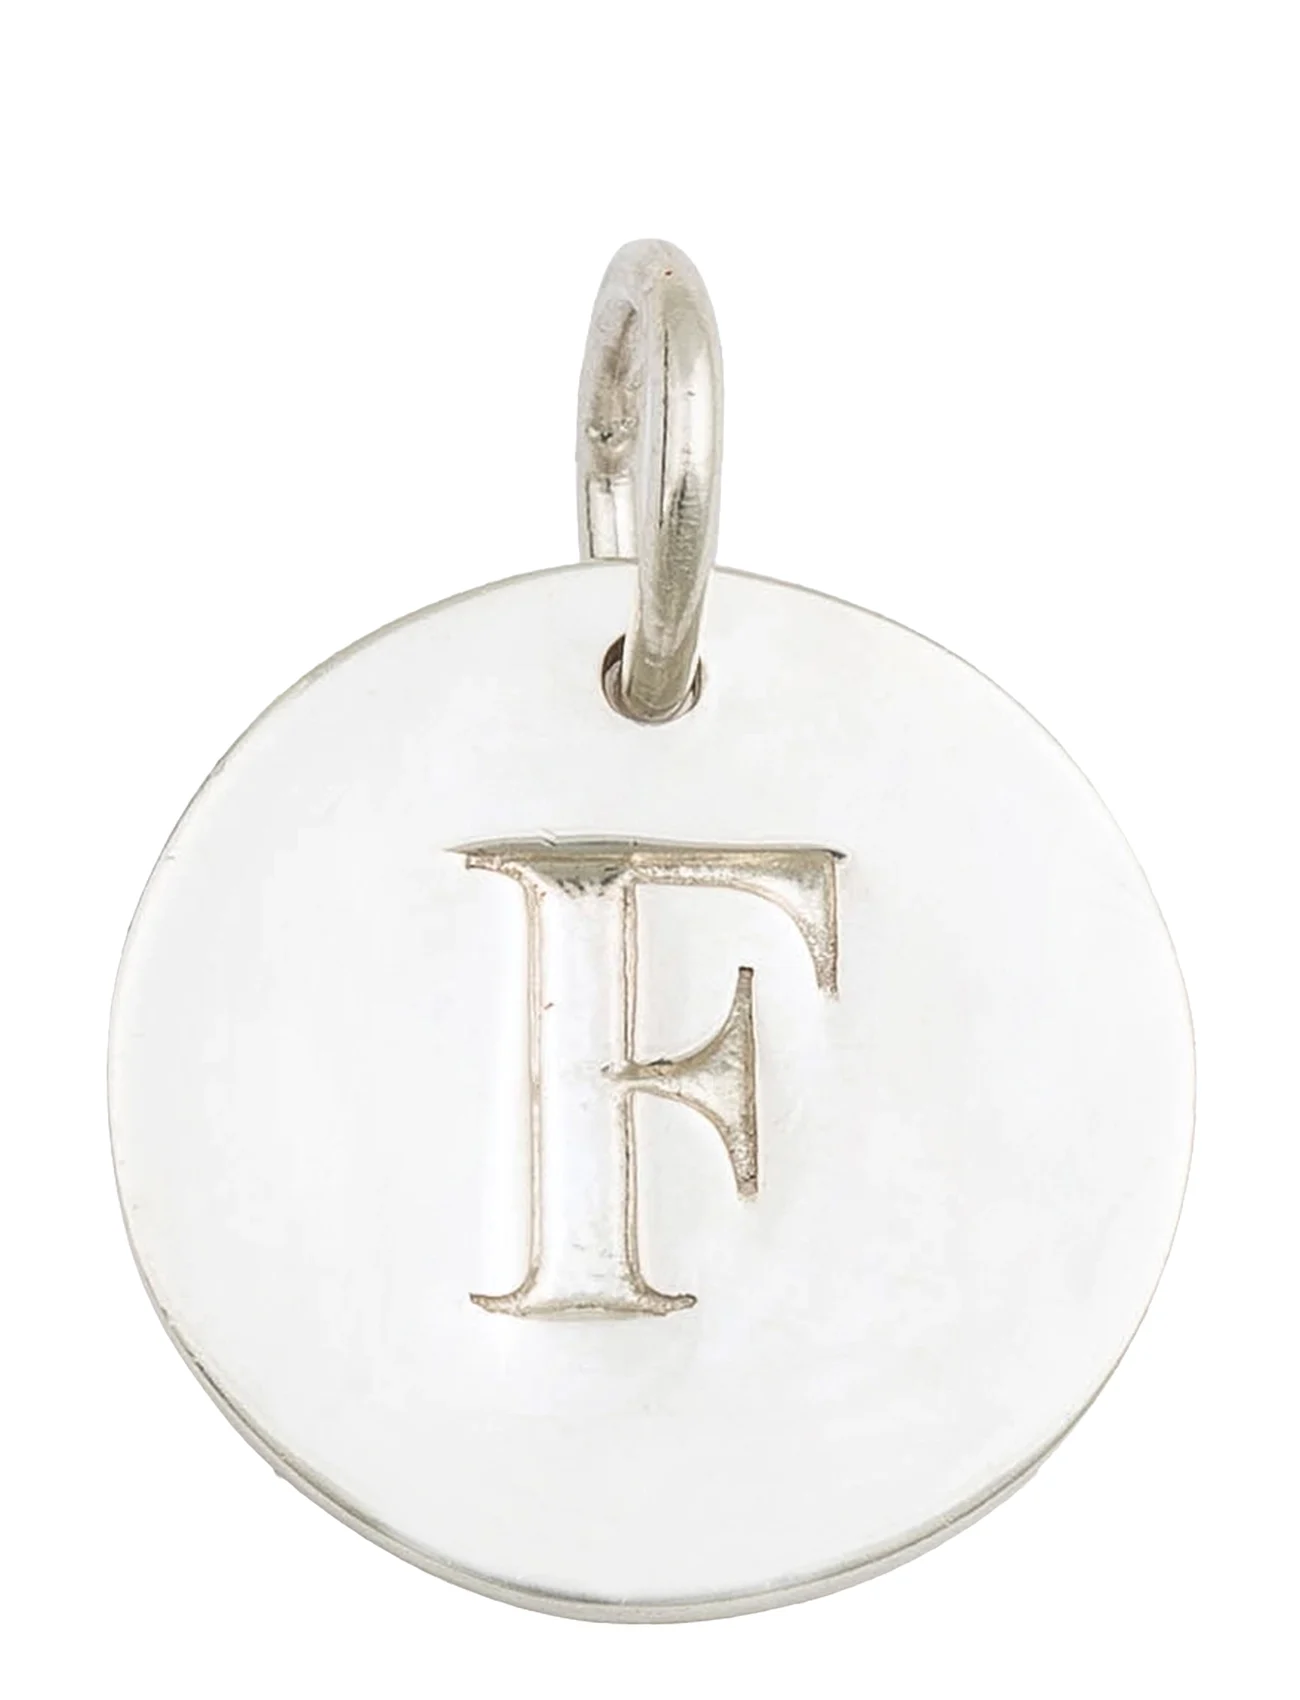 Syster P - Beloved Letter Silver - peoriided outlet-hindadega - silver - 0